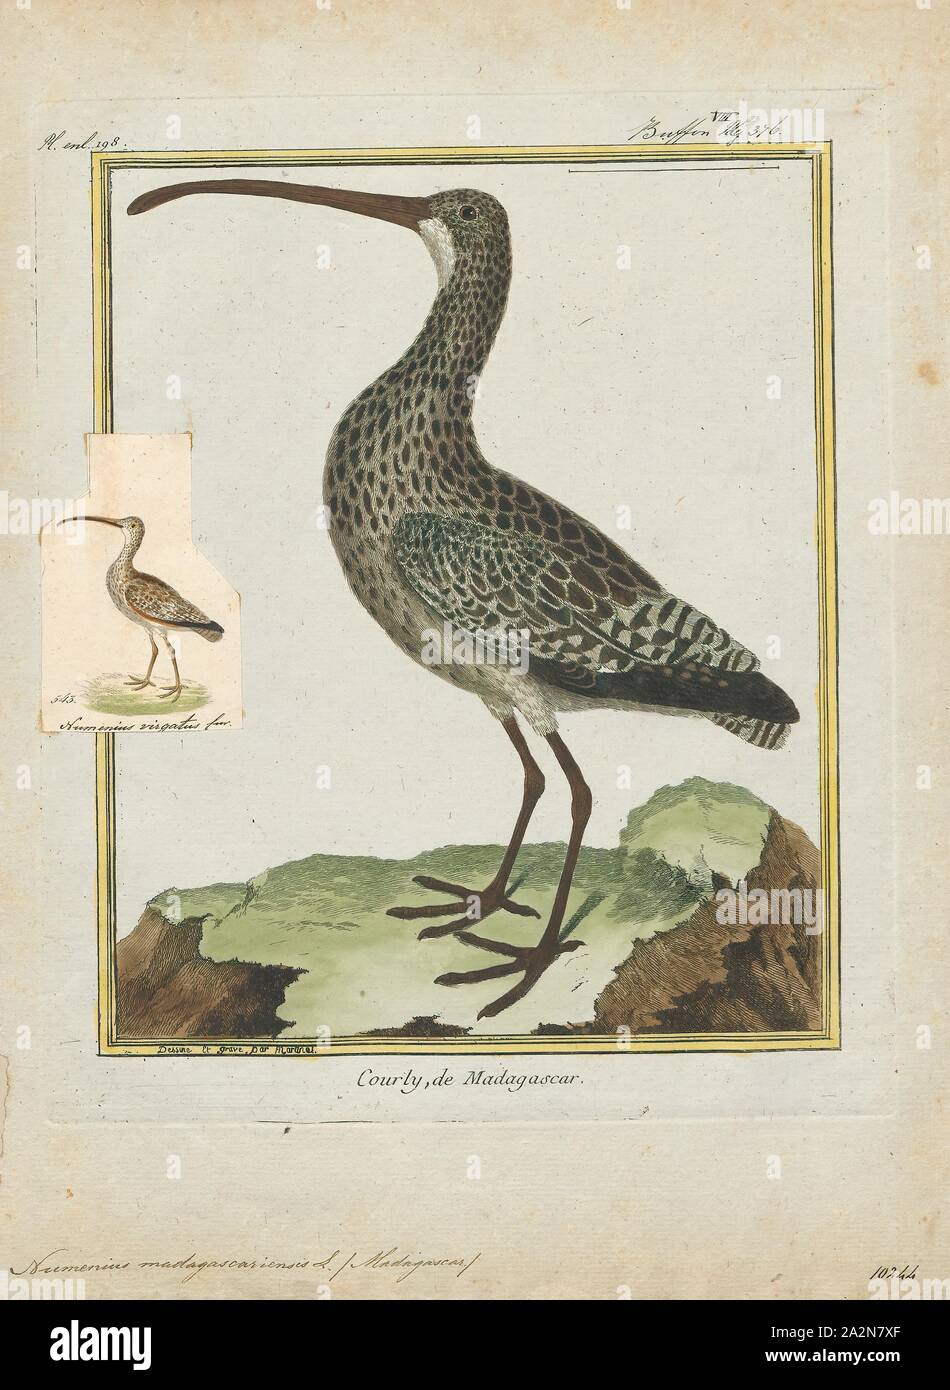 Numenius madagascariensis, Print, The Far Eastern curlew (Numenius madagascariensis) is a large shorebird most similar in appearance to the long-billed curlew, but slightly larger. It is mostly brown in color, differentiated from other curlews by its plain, unpatterned brown underwing. It is not only the largest curlew but probably the world's largest sandpiper, at 60–66 cm (24–26 in) in length and 110 cm (43 in) across the wings. The body is reportedly 565–1, 150 g (1.246–2.535 lb), which may be equaled by the Eurasian curlew. The extremely long bill, at 12.8–20.1 cm (5.0–7.9 in) in length Stock Photo